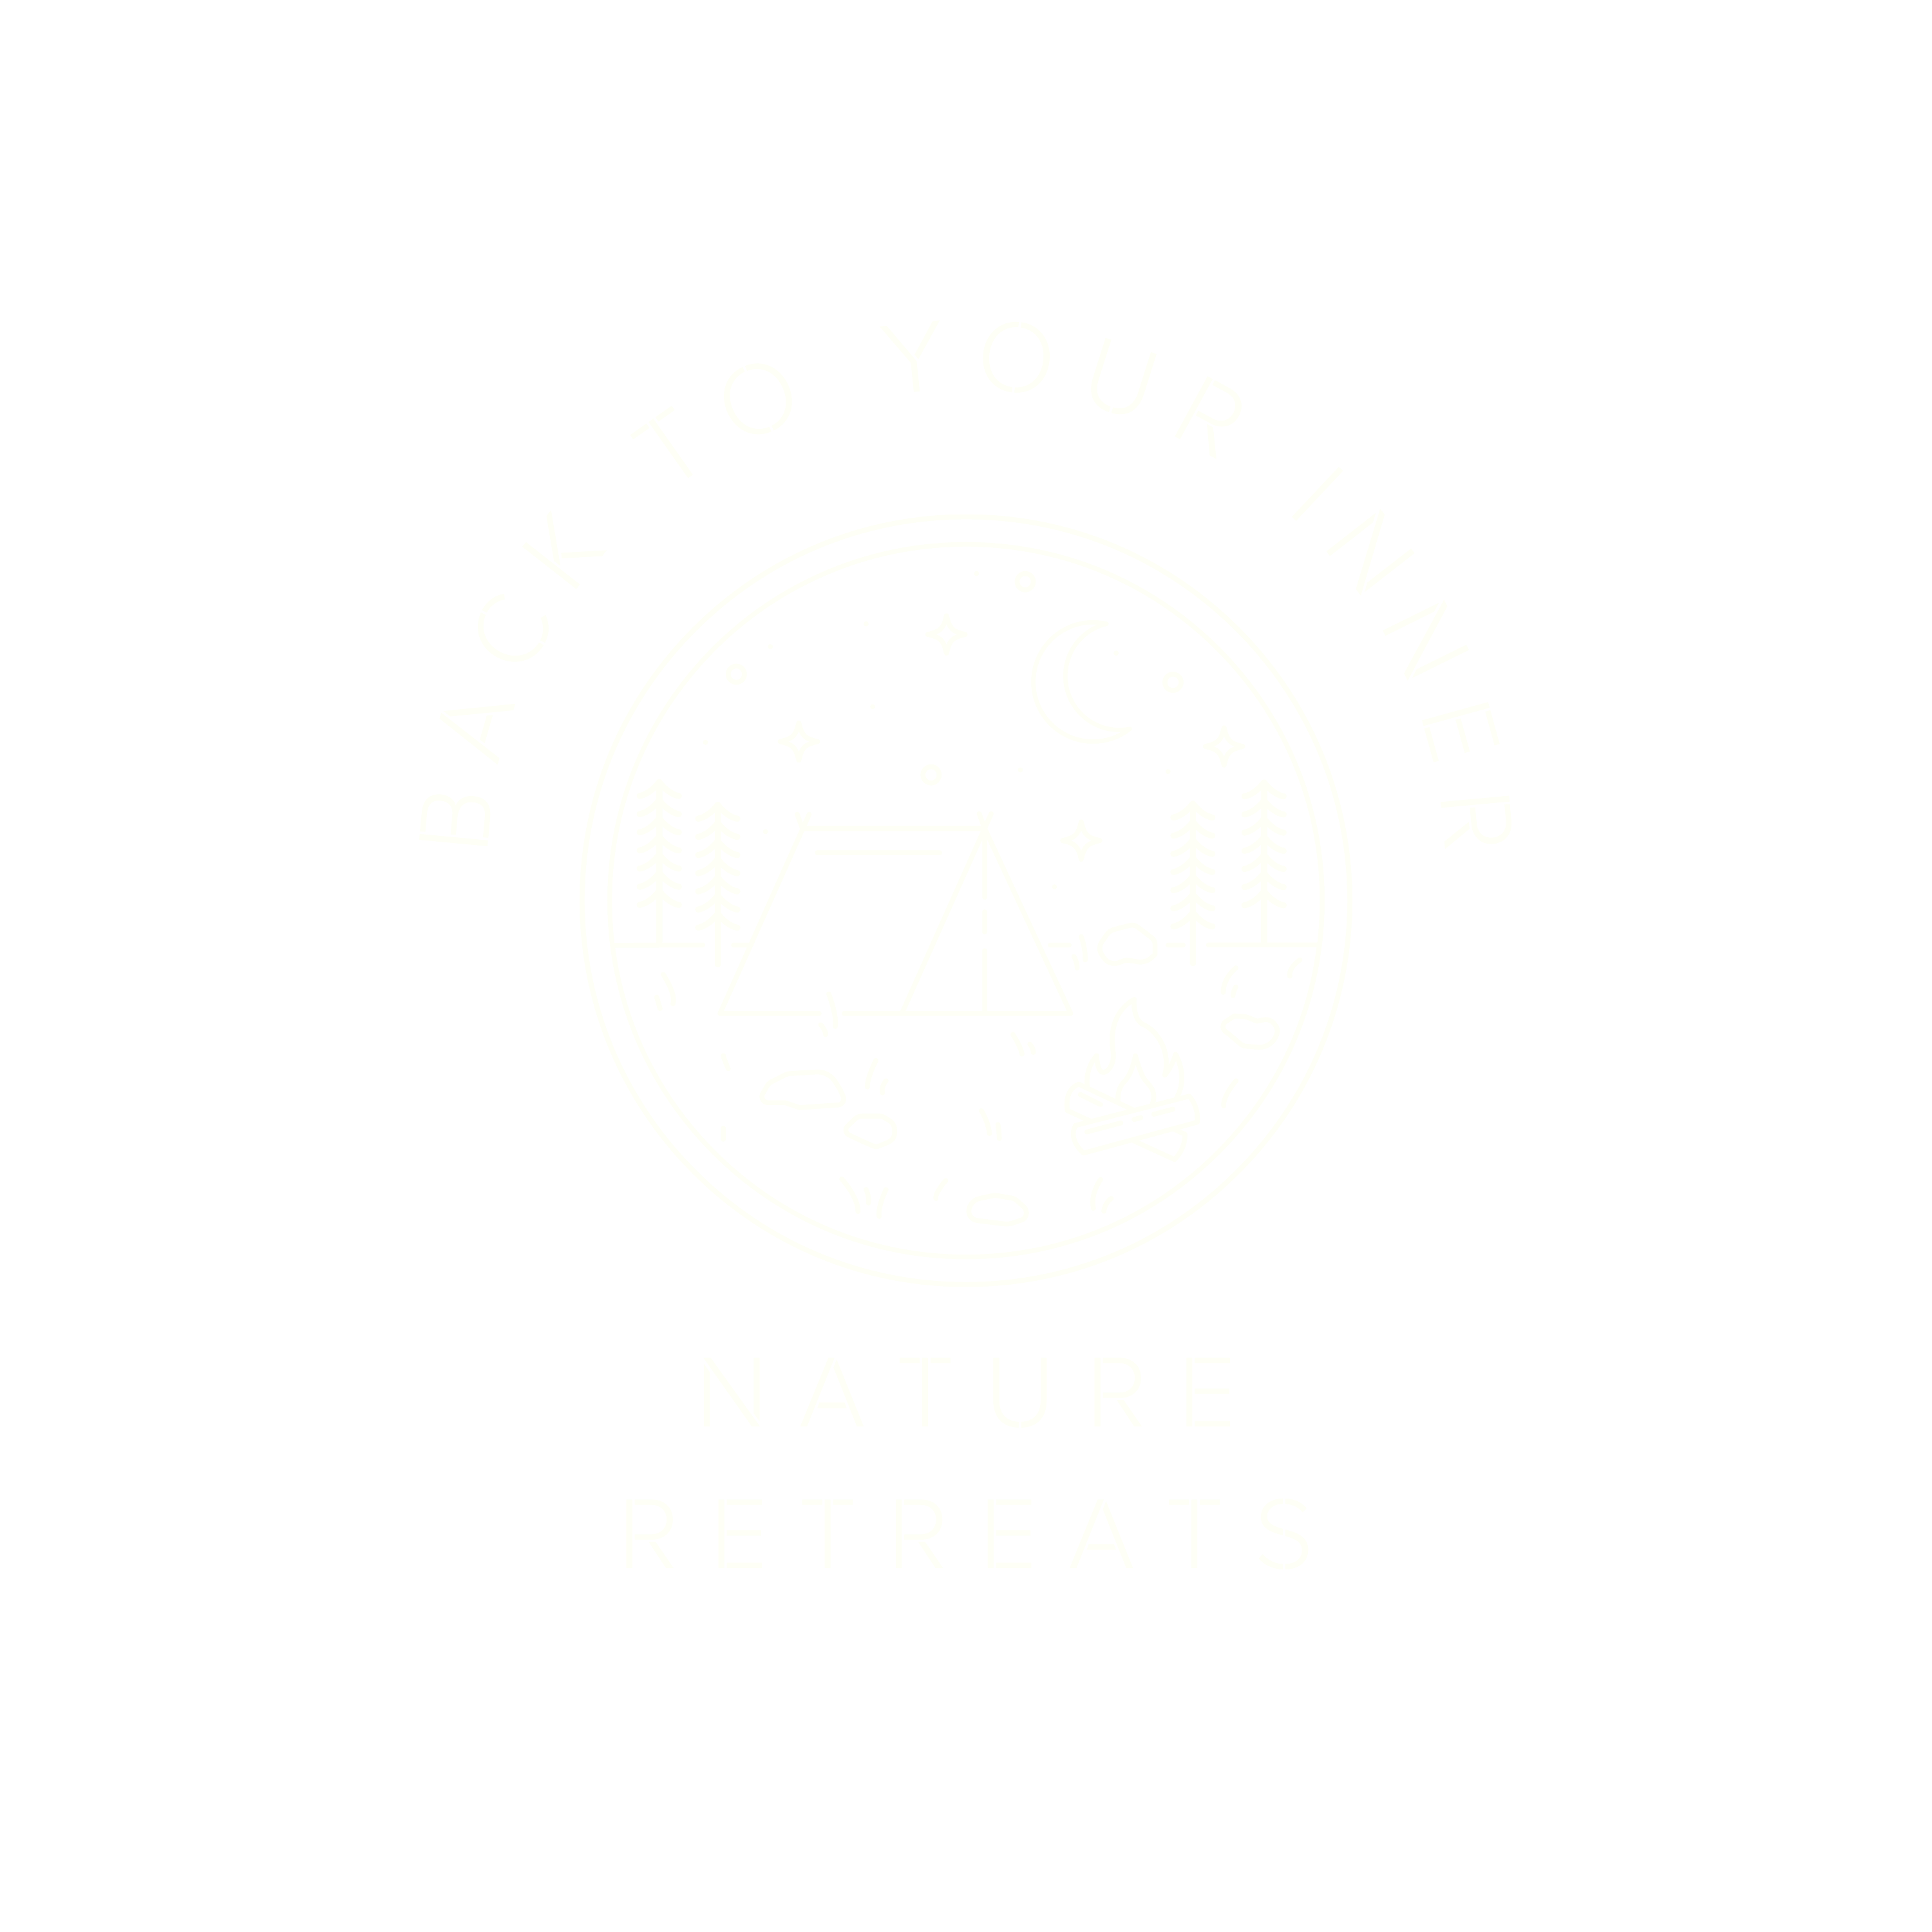 Back to your inner nature retreat